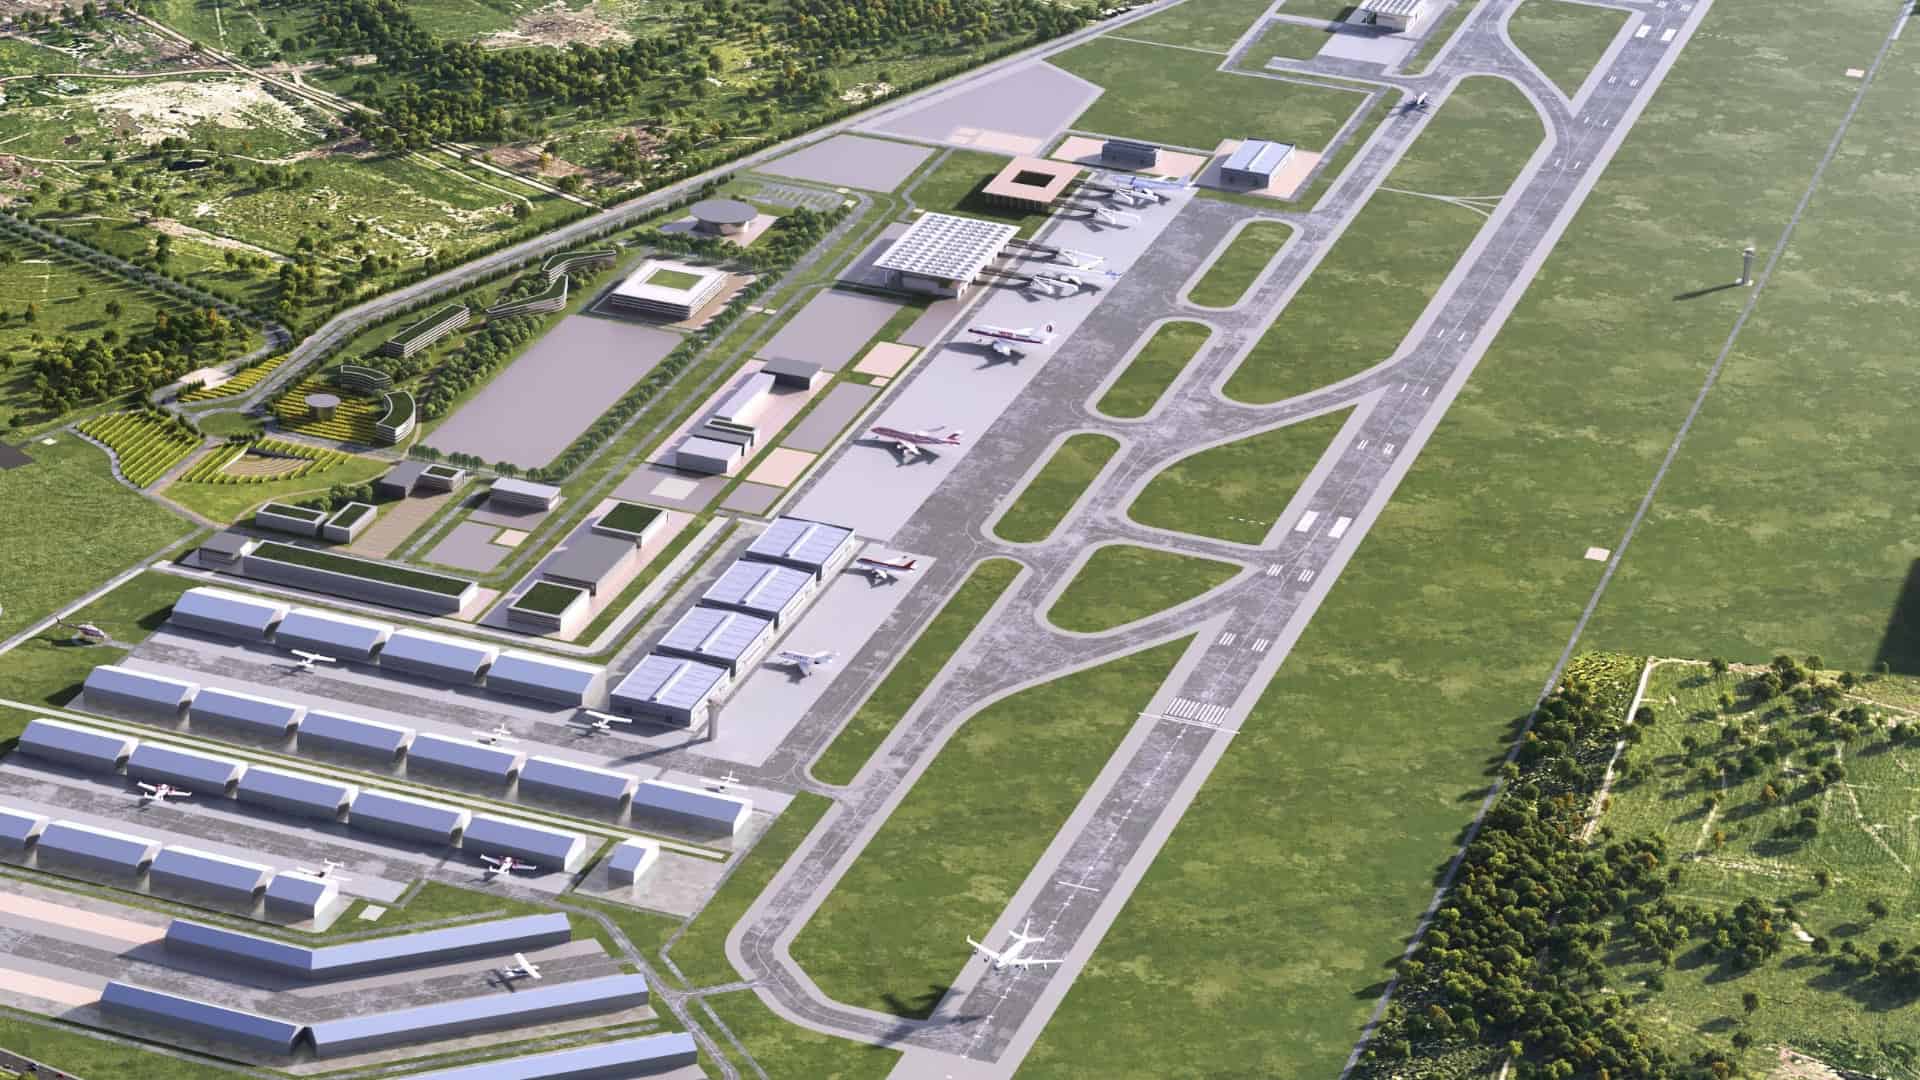 rendered image of new airport expansion